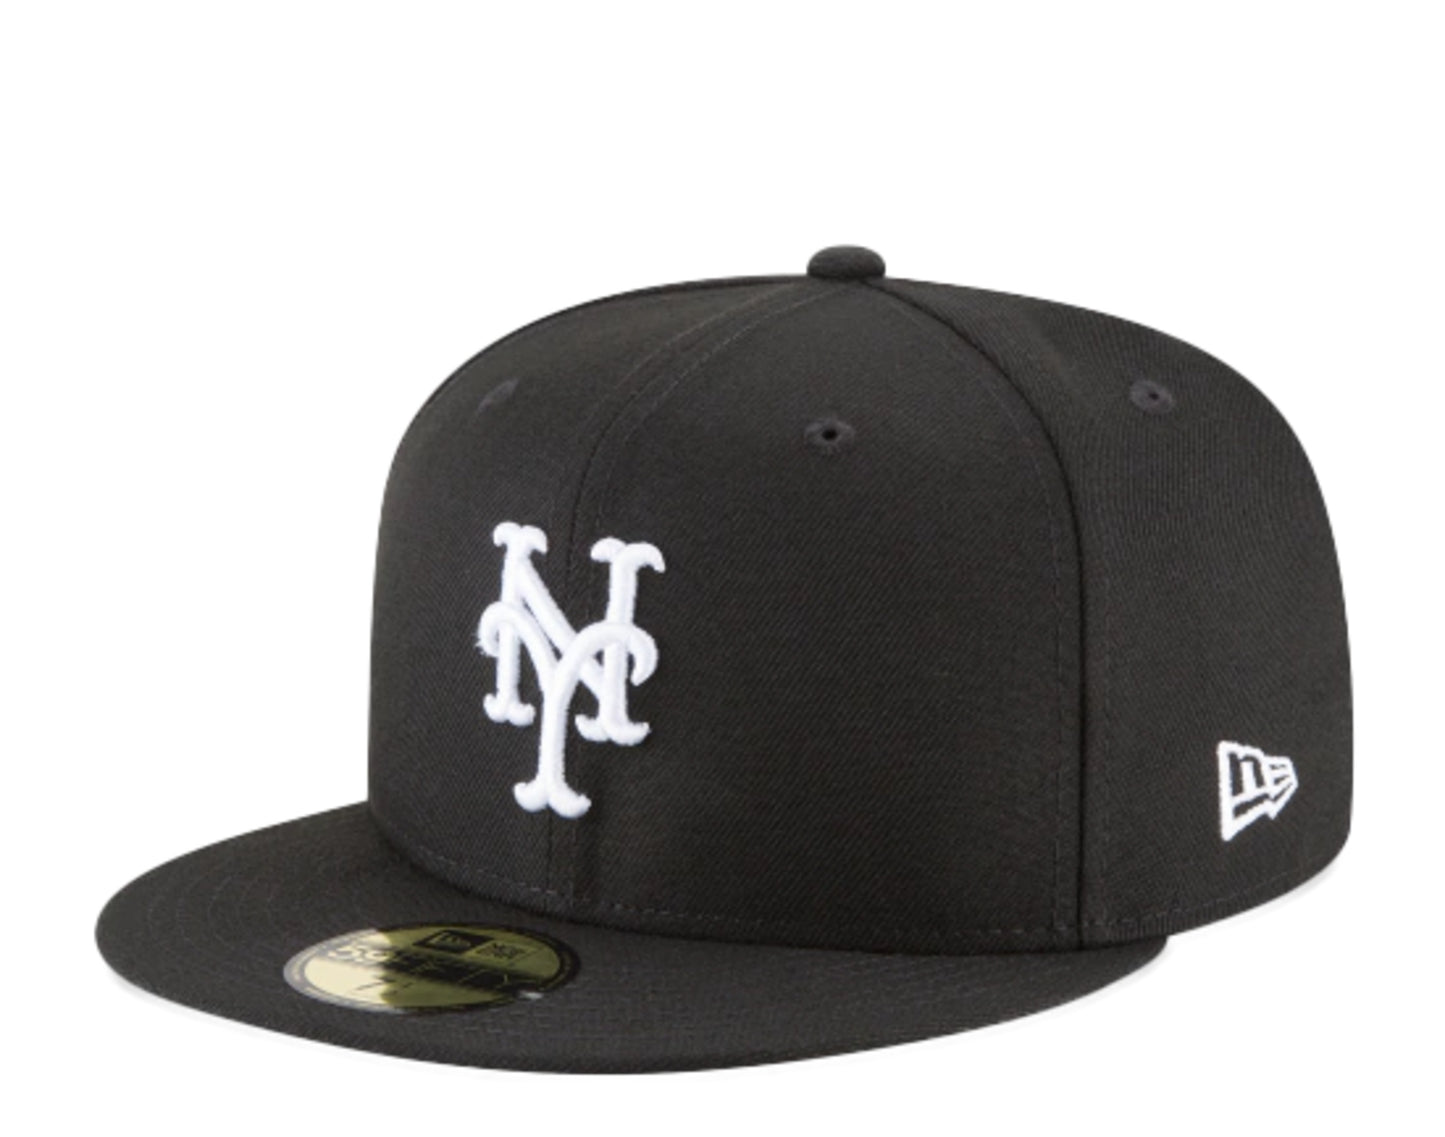 New Era 59Fifty MLB New York Mets Black And White Basic Fitted Hat 11591130